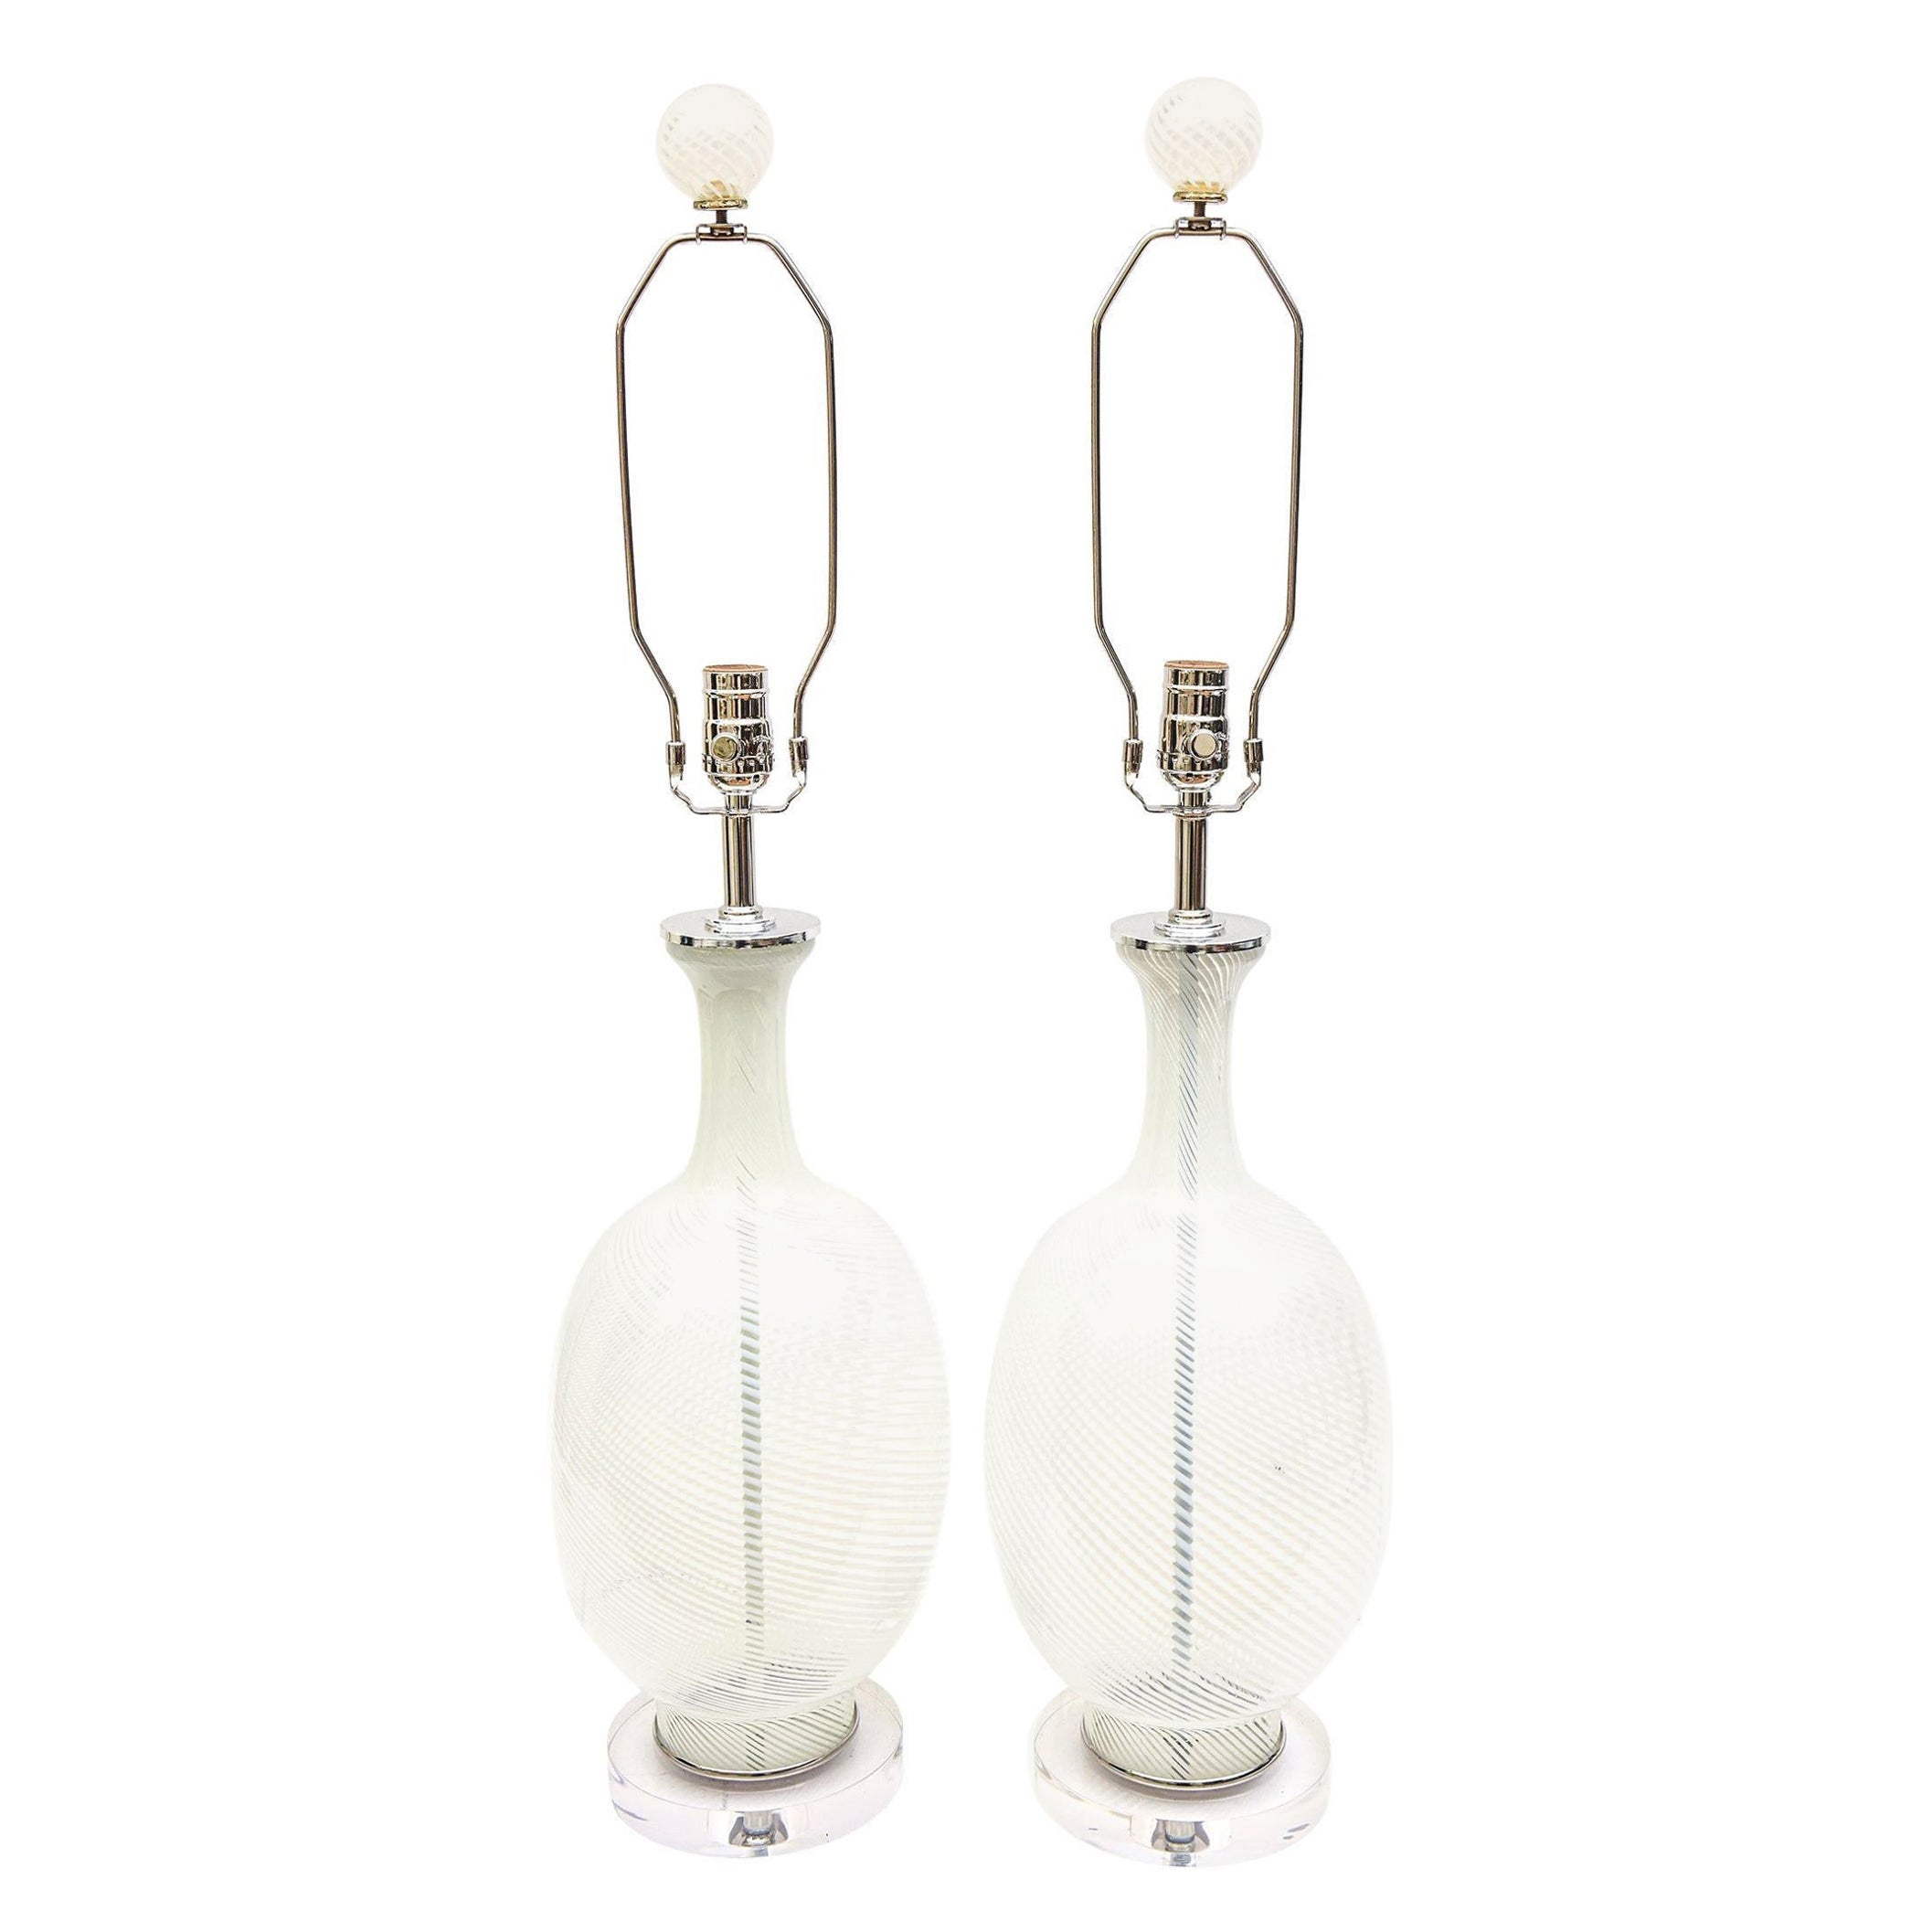 Aureliano Toso Murano Vintage White Swirled Glass Lamps with Glass Finials Pair  For Sale